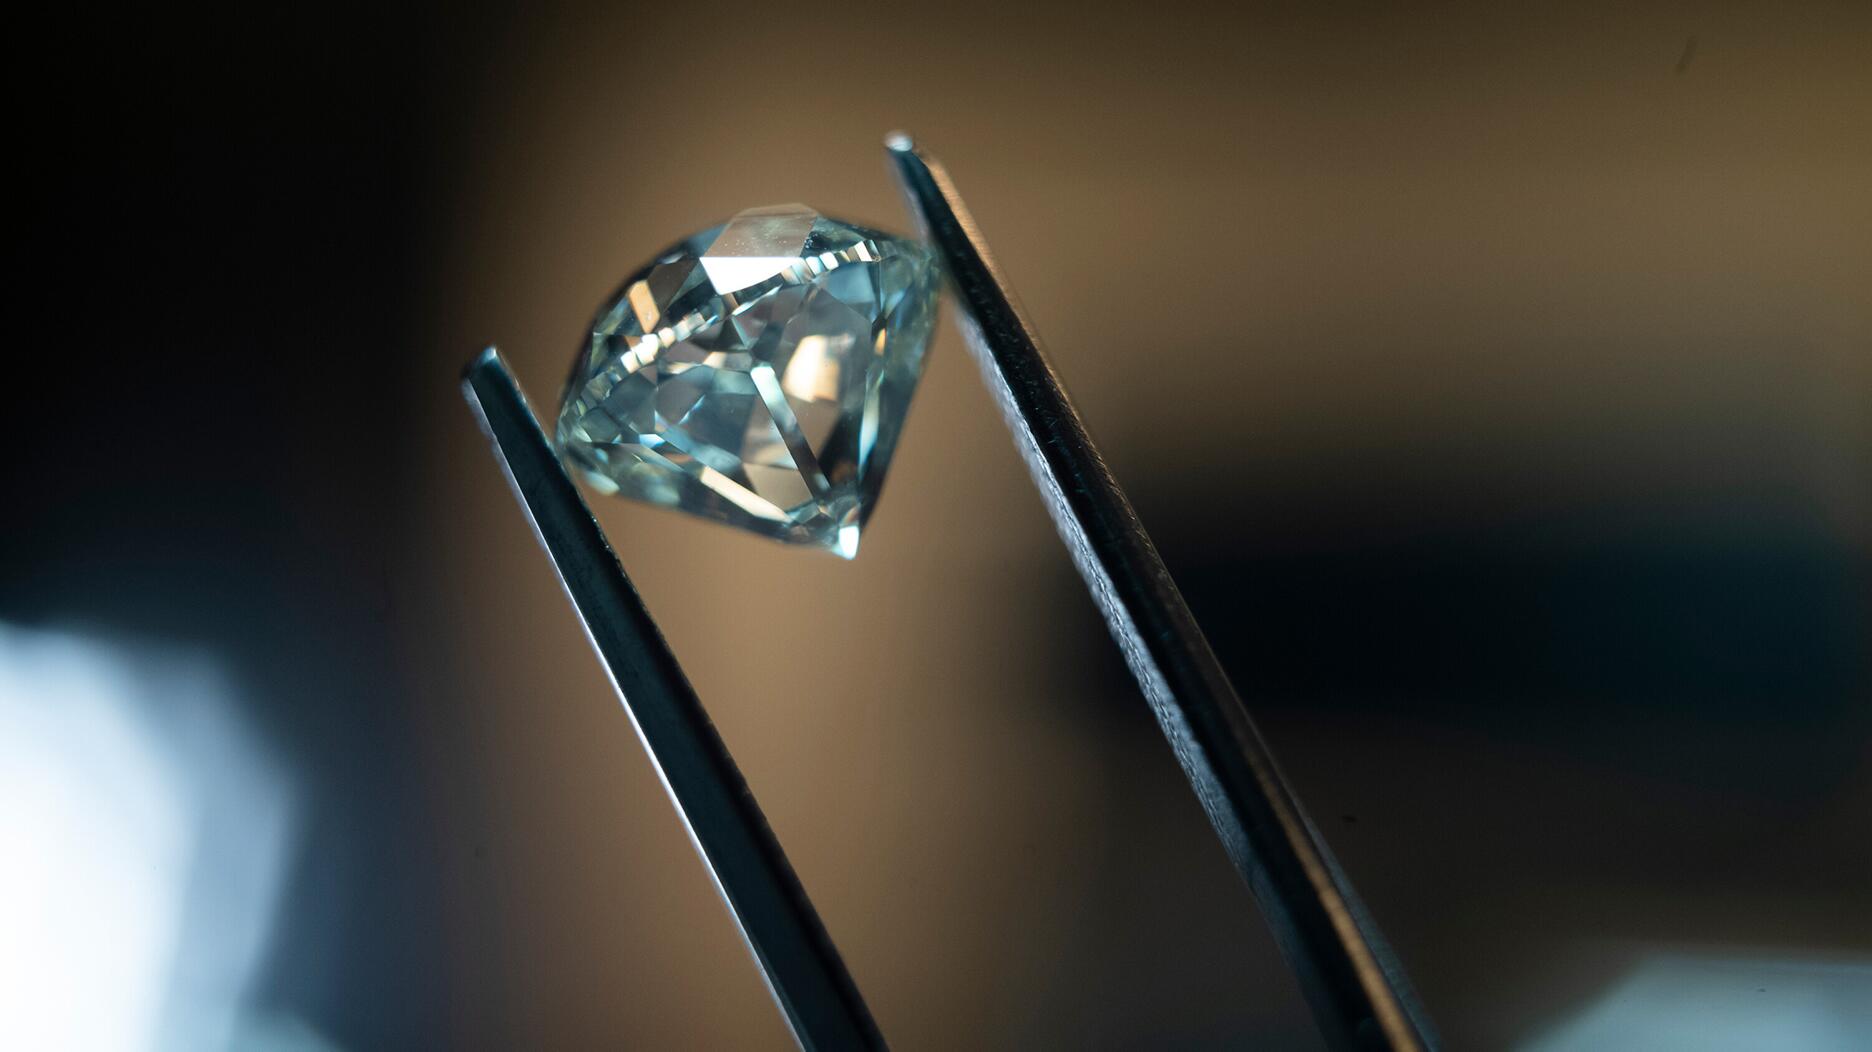 Covid-19 in India limited rough diamond sales: De Beers - The Retail  Jeweller India